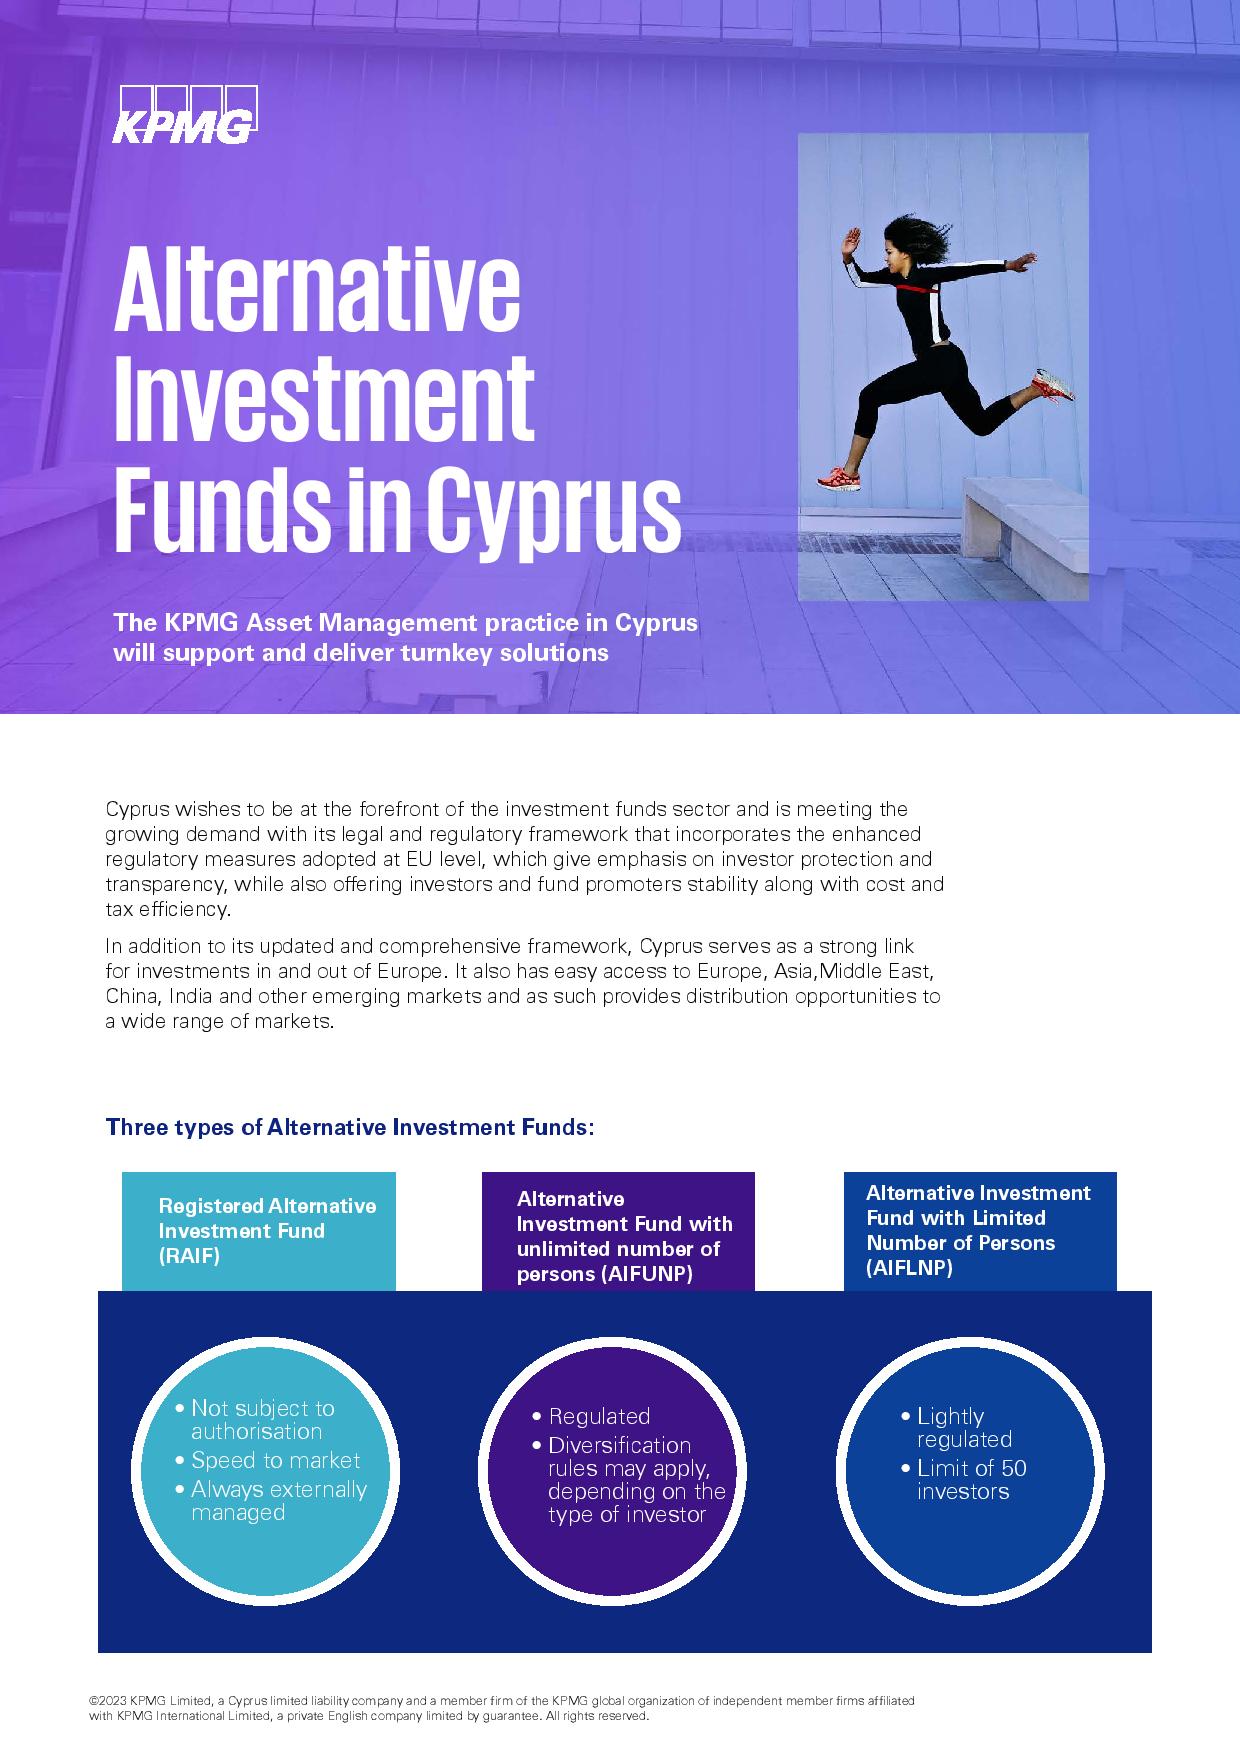 Alternative Investment Funds in Cyprus